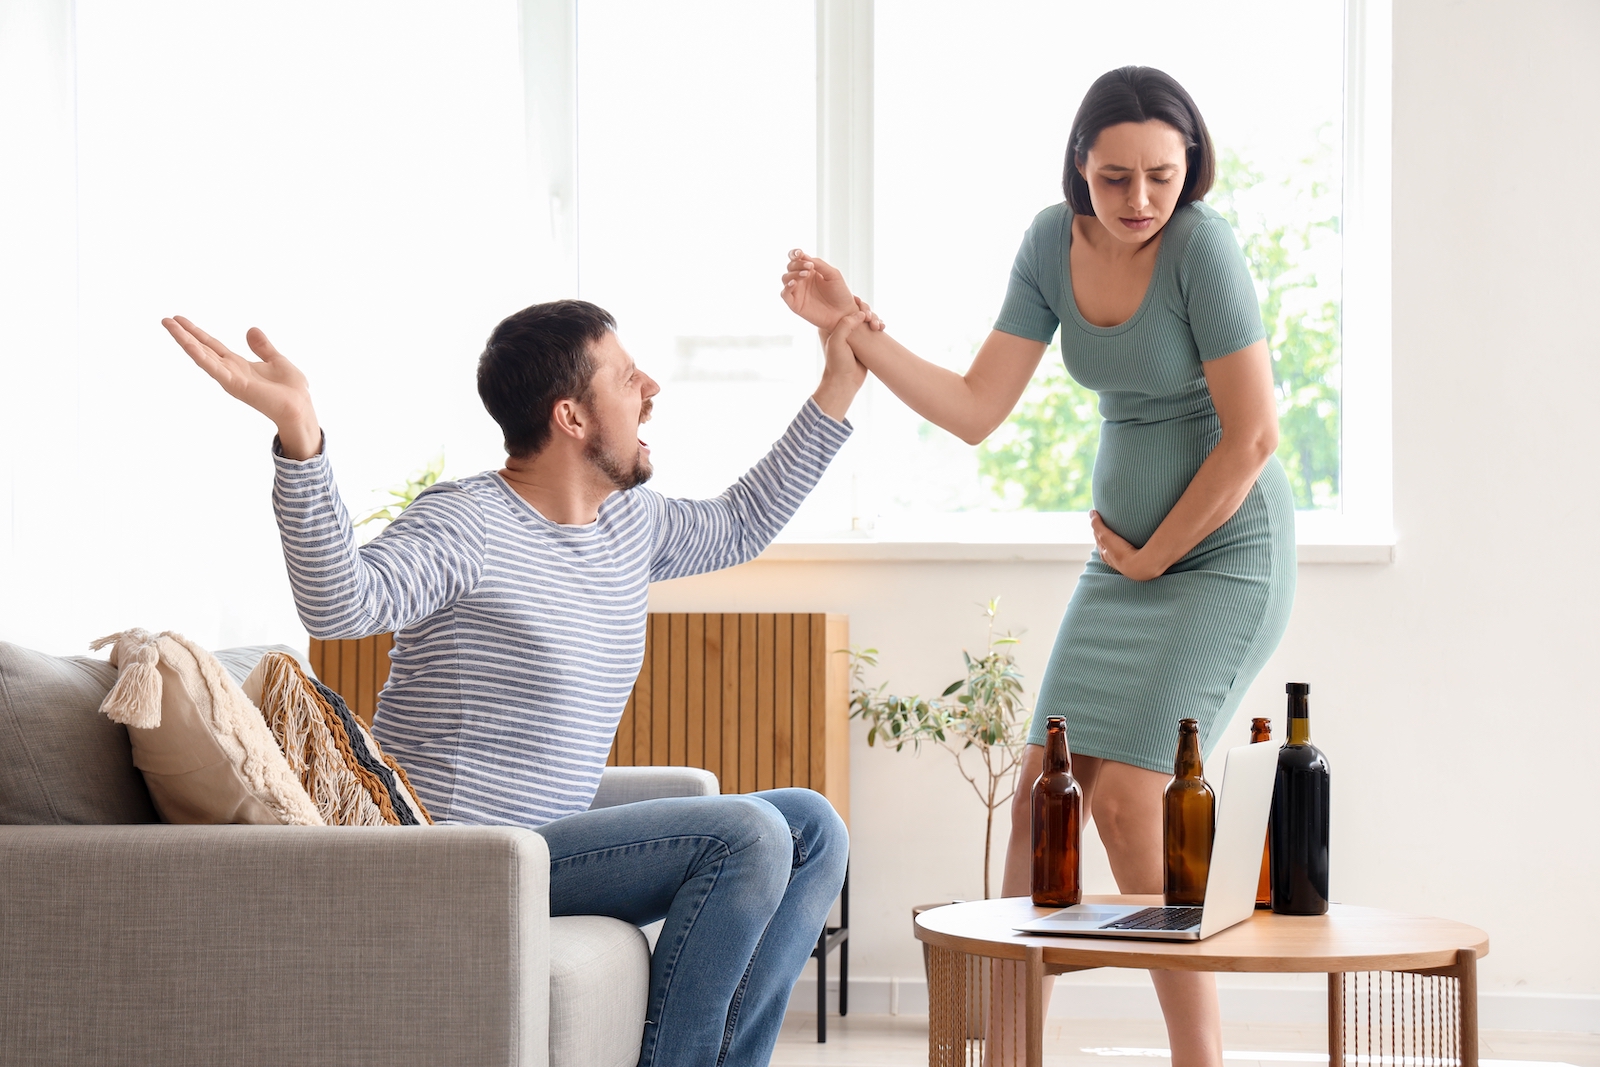 Drunk husband fighting with his pregnant wife at home. Domestic violence concept